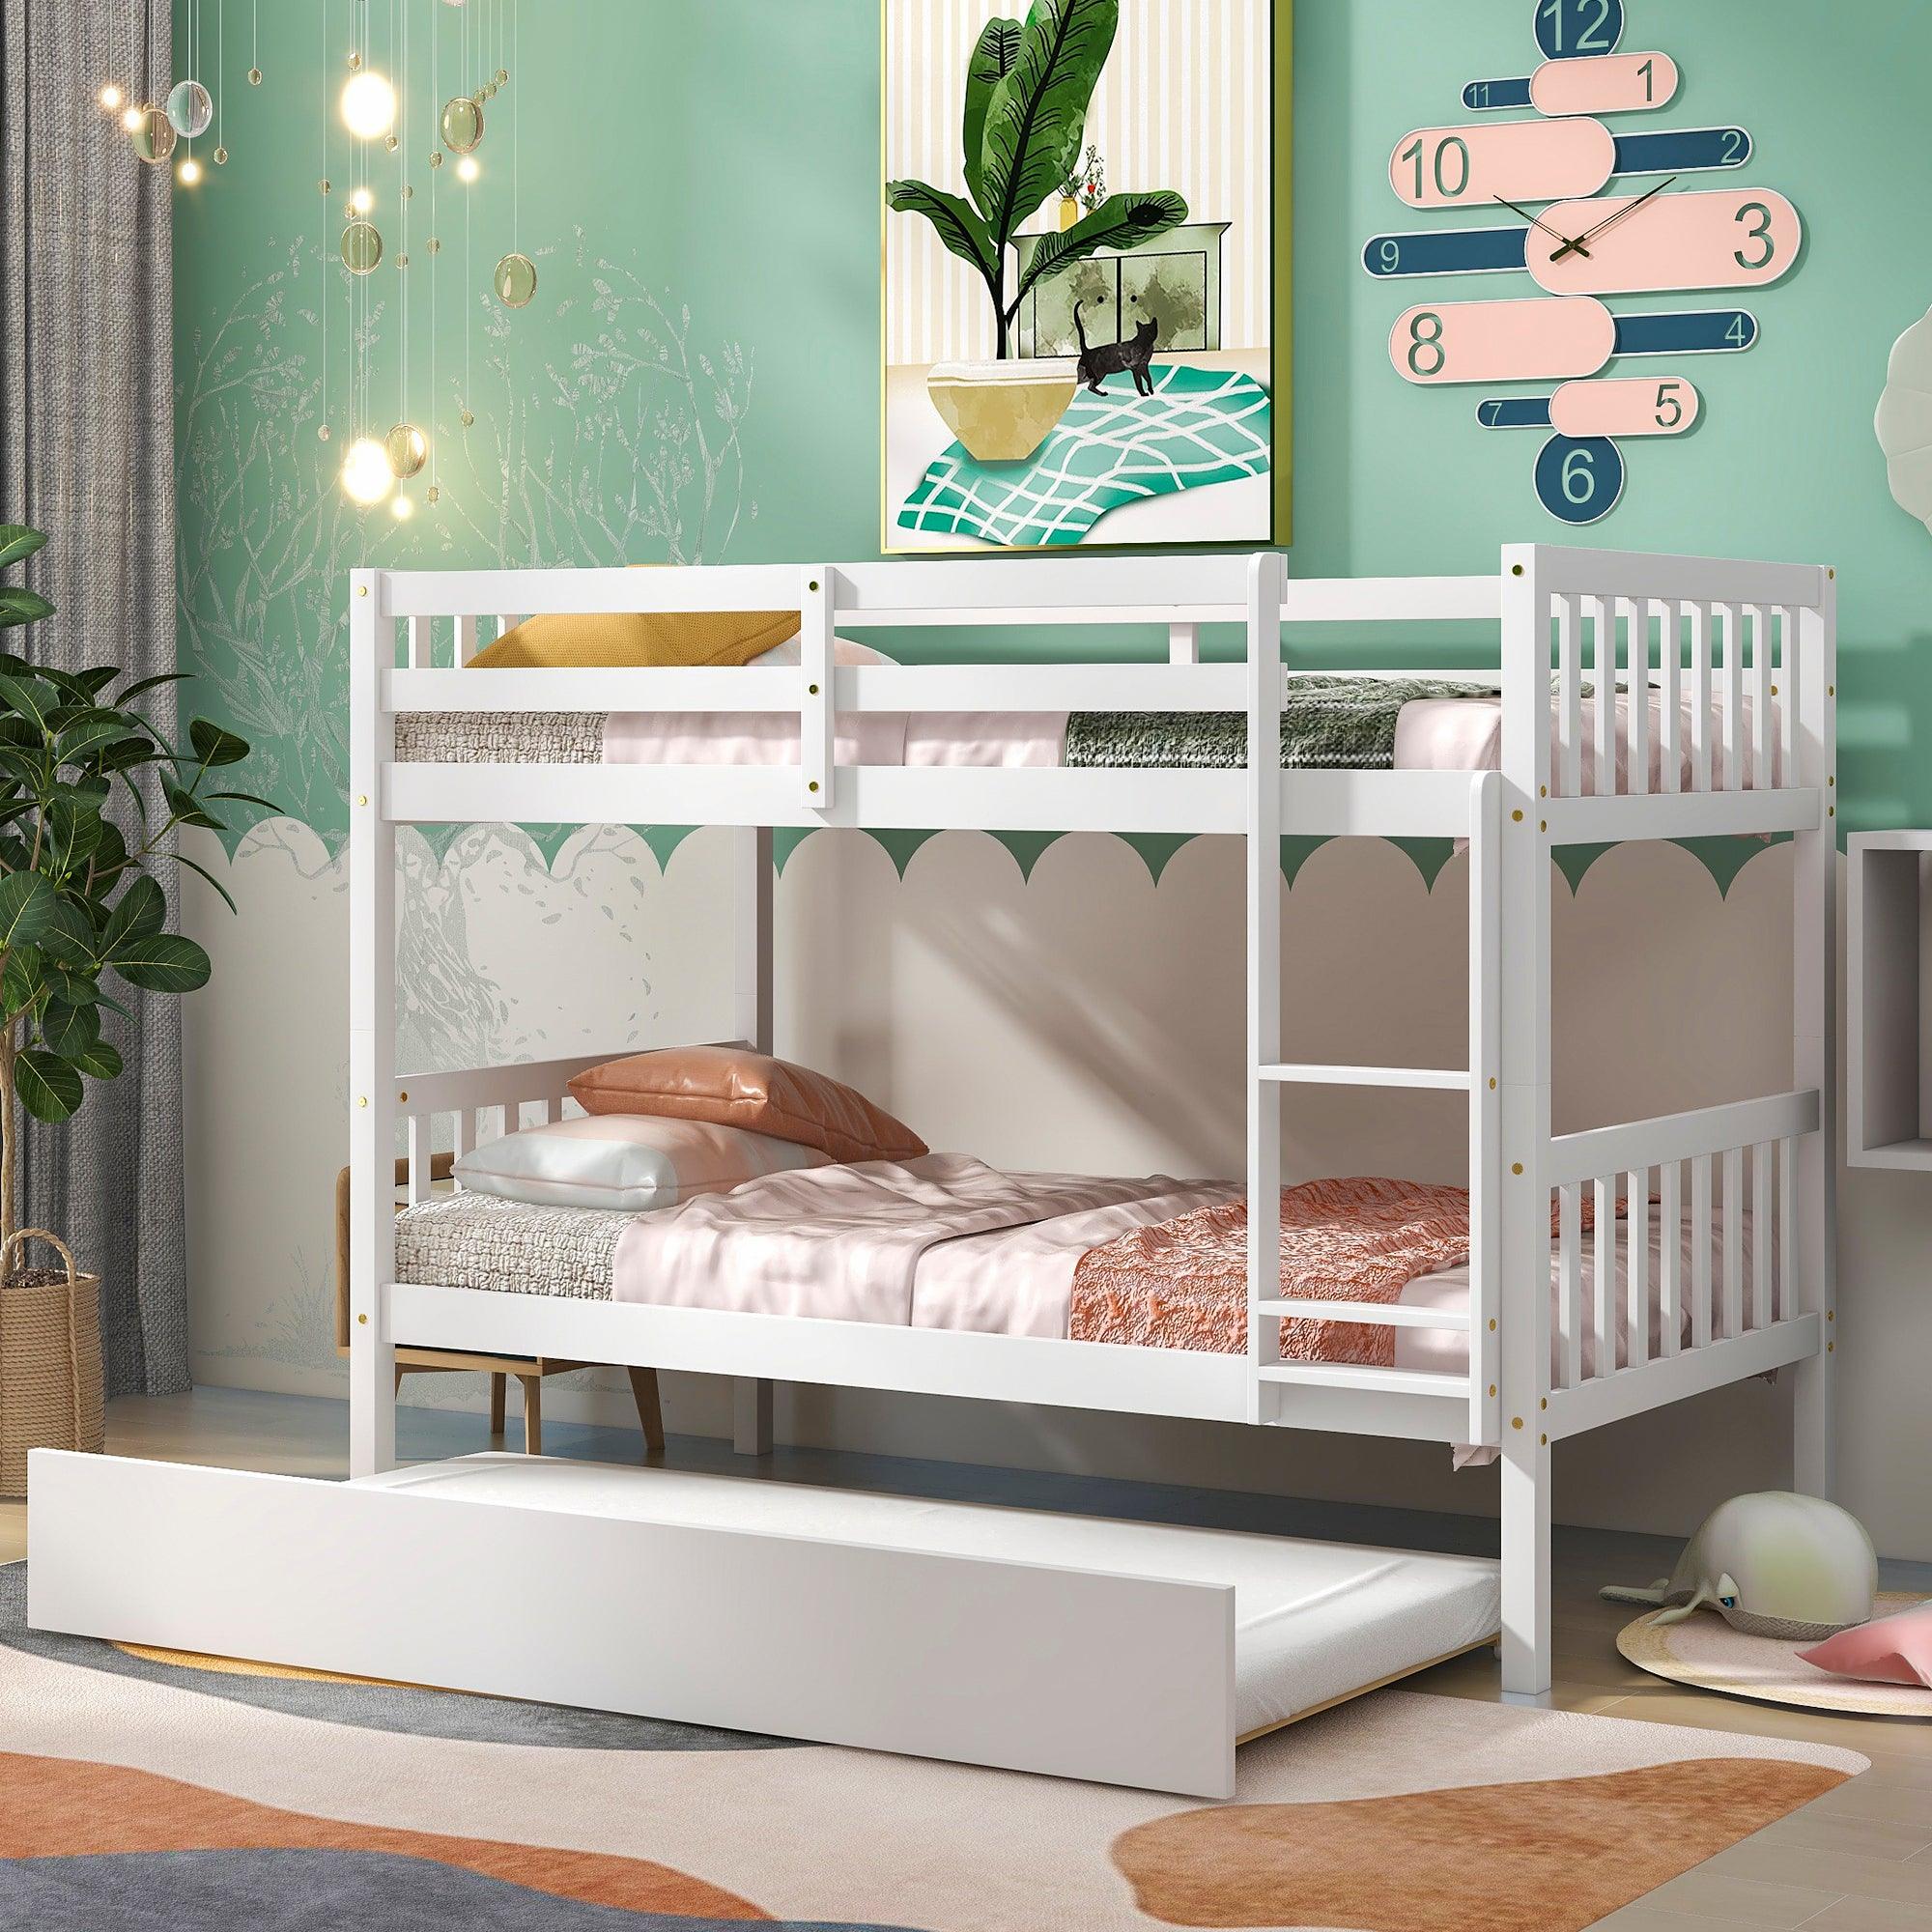 🆓🚛 Twin Over Twin Bunk Beds With Trundle, Solid Wood Trundle Bed Frame With Safety Rail & Ladder, Kids/Teens Bedroom, Guest Room Furniture, Can Be Converted Into 2 Beds, White